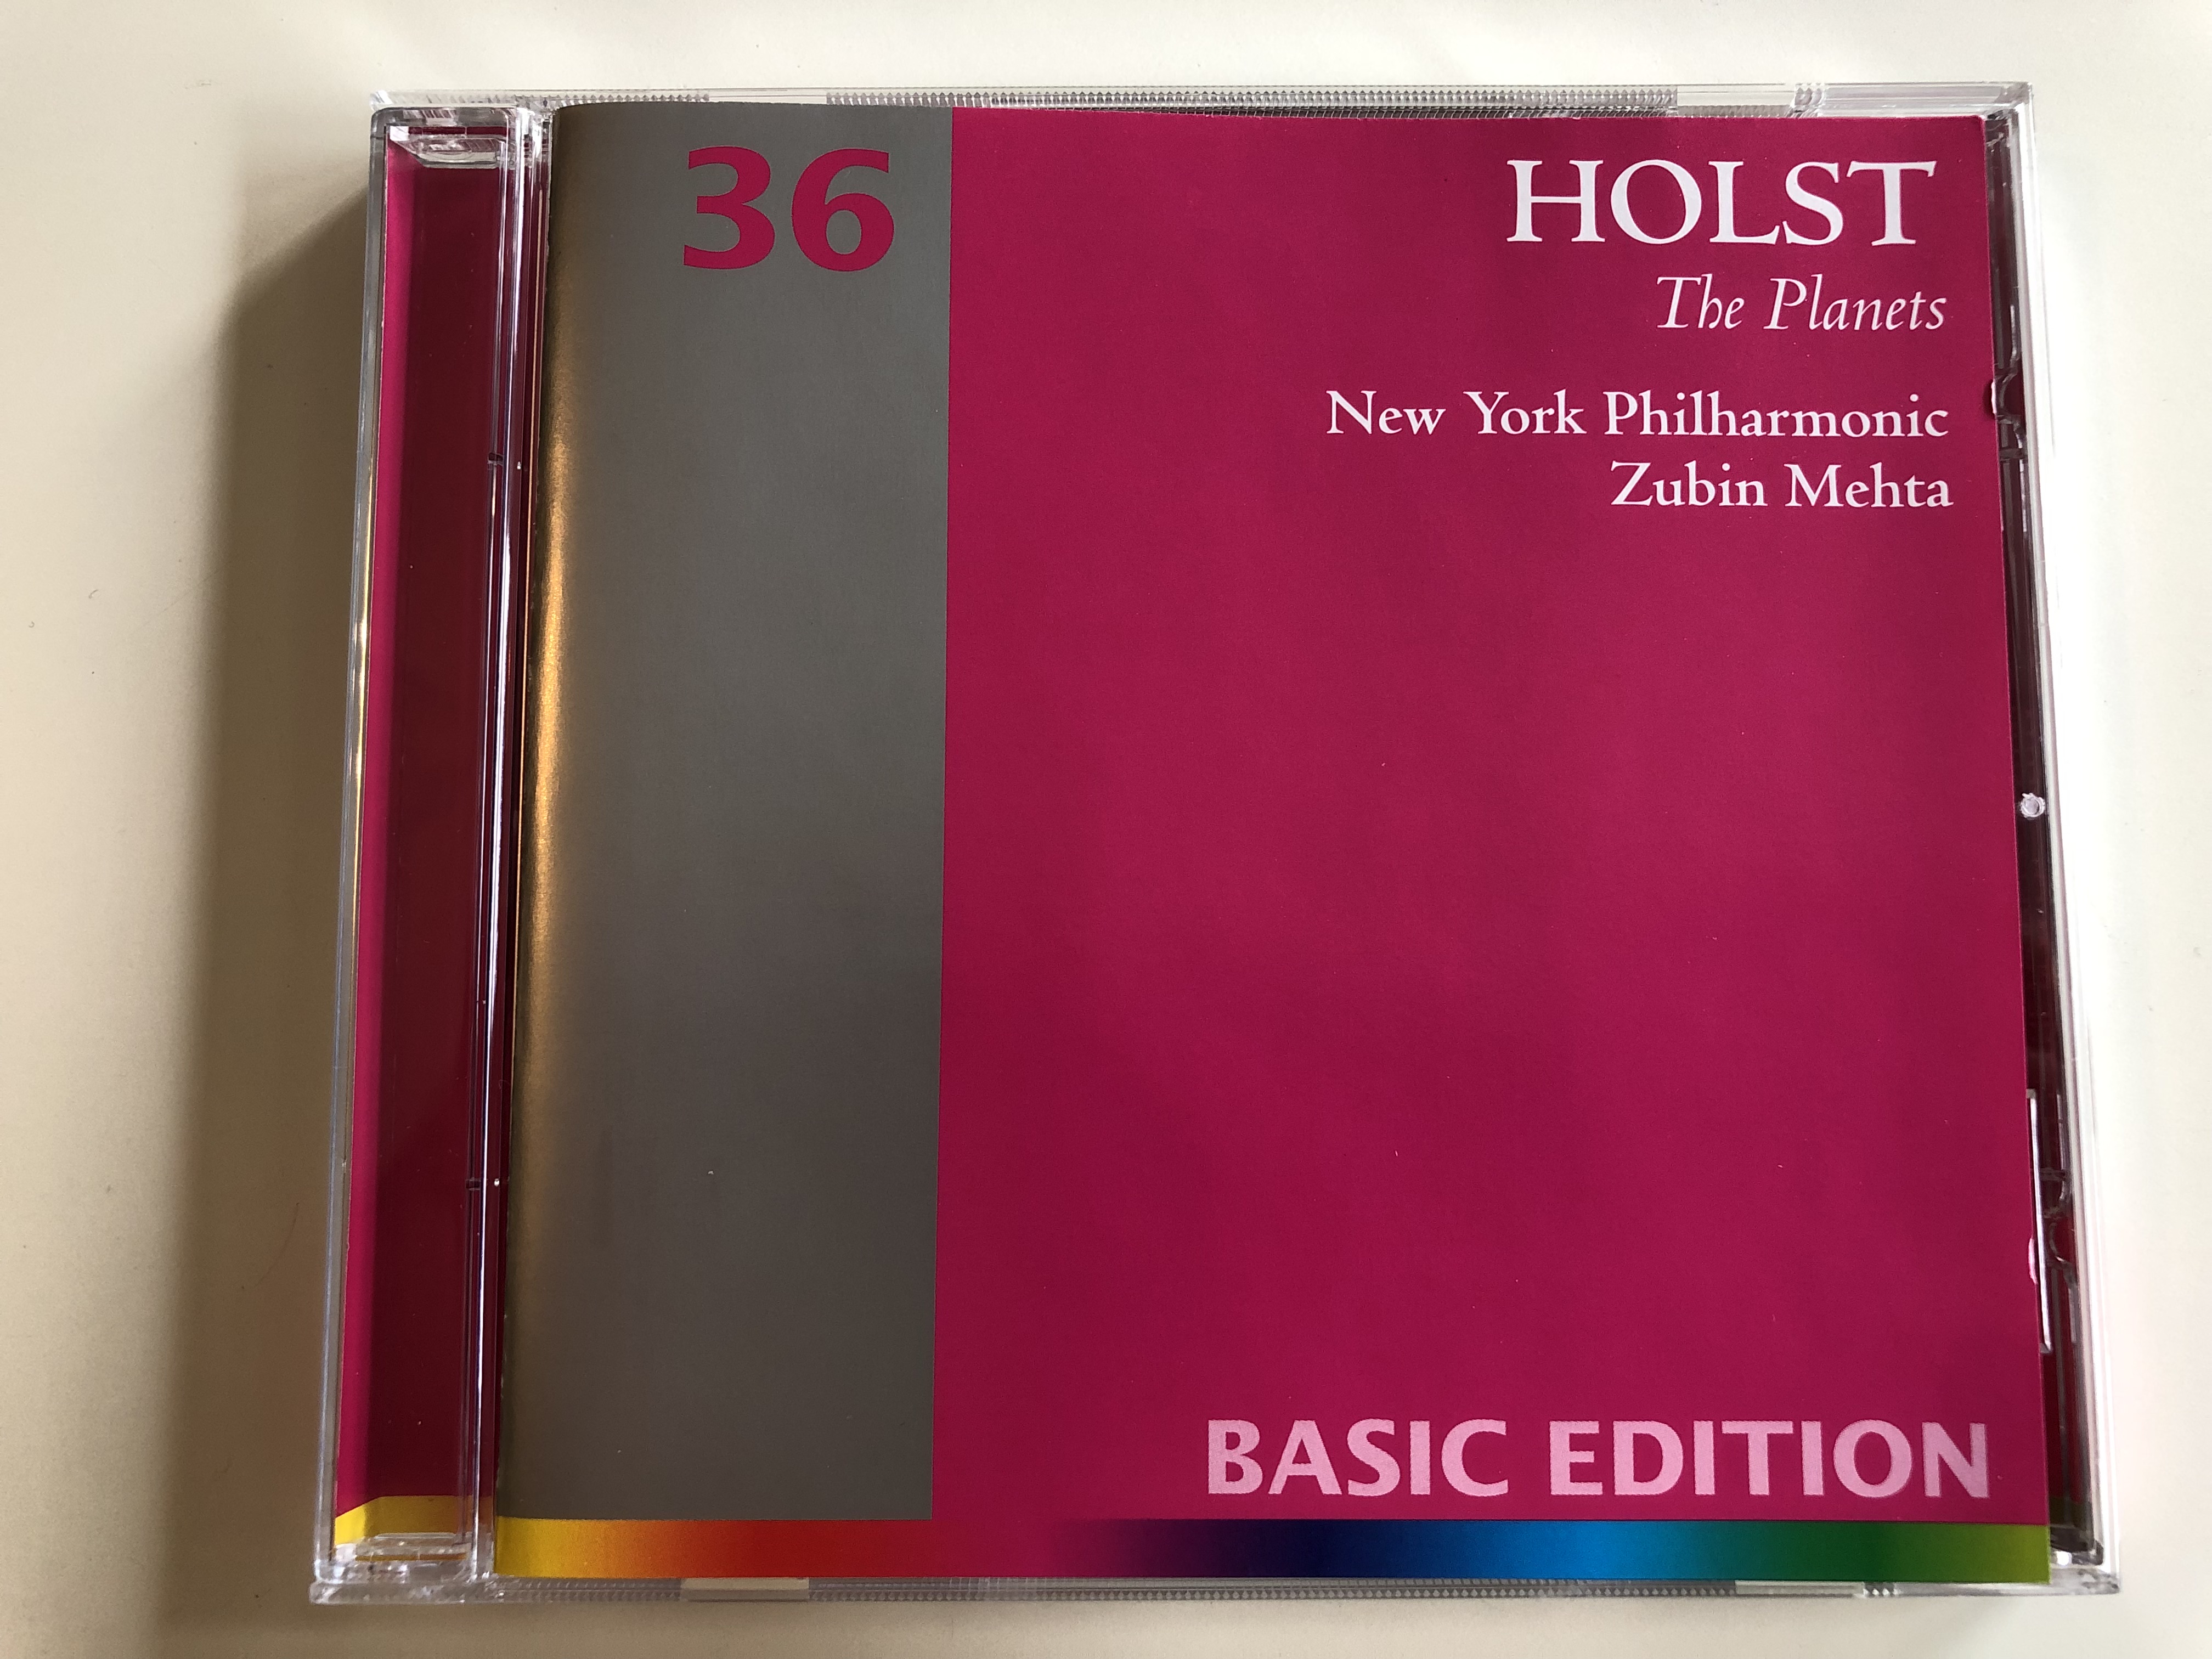 holst-the-planets-new-york-philharmonic-conducted-by-zubin-mehta-basic-edition-36-audio-cd-2001-1-.jpg